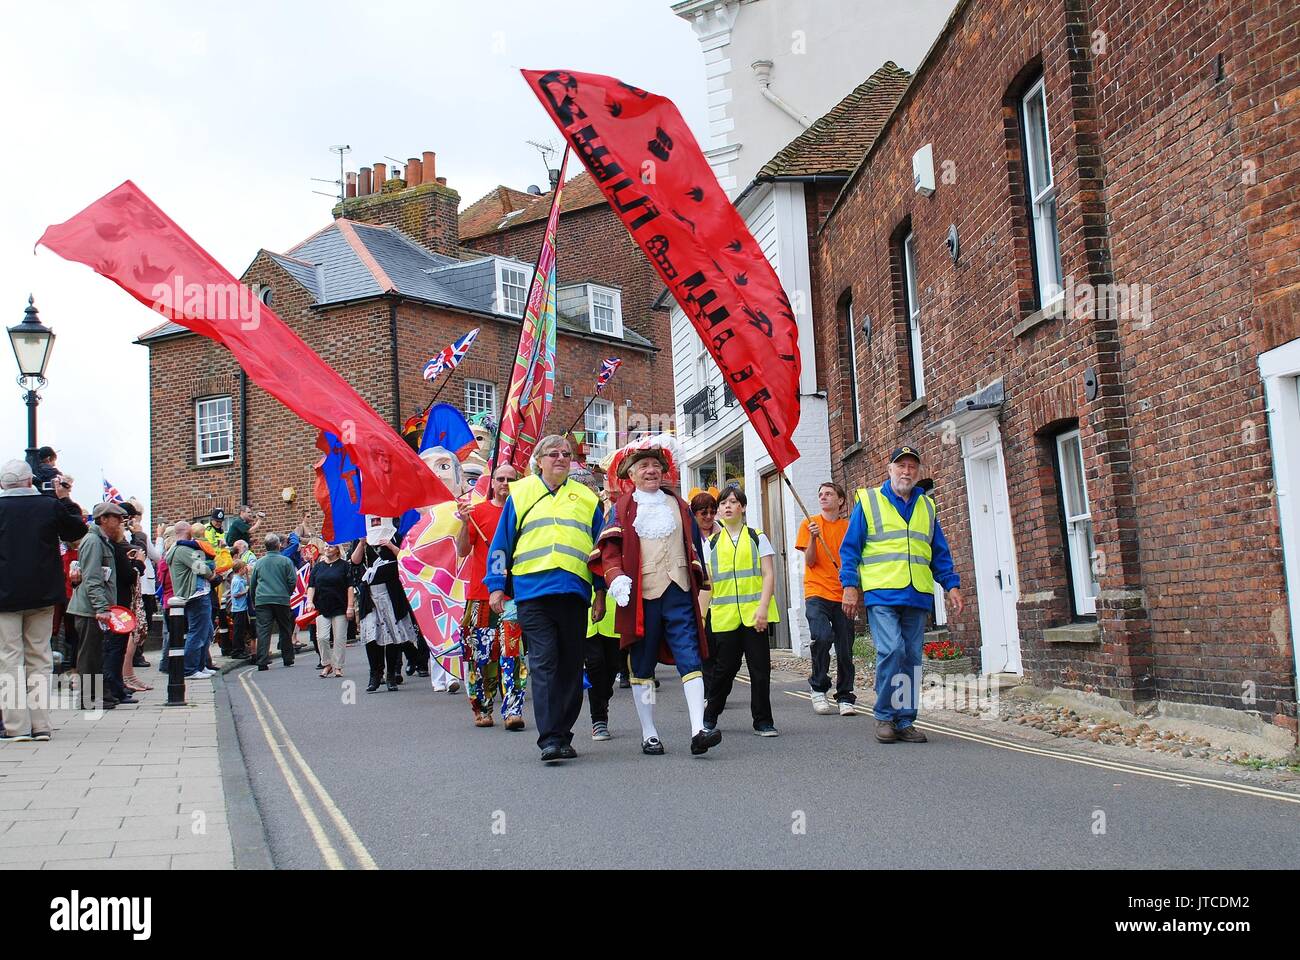 People parade through the streets at an Olympic torch relay event at Rye in East Sussex, England on July 18, 2012. Stock Photo